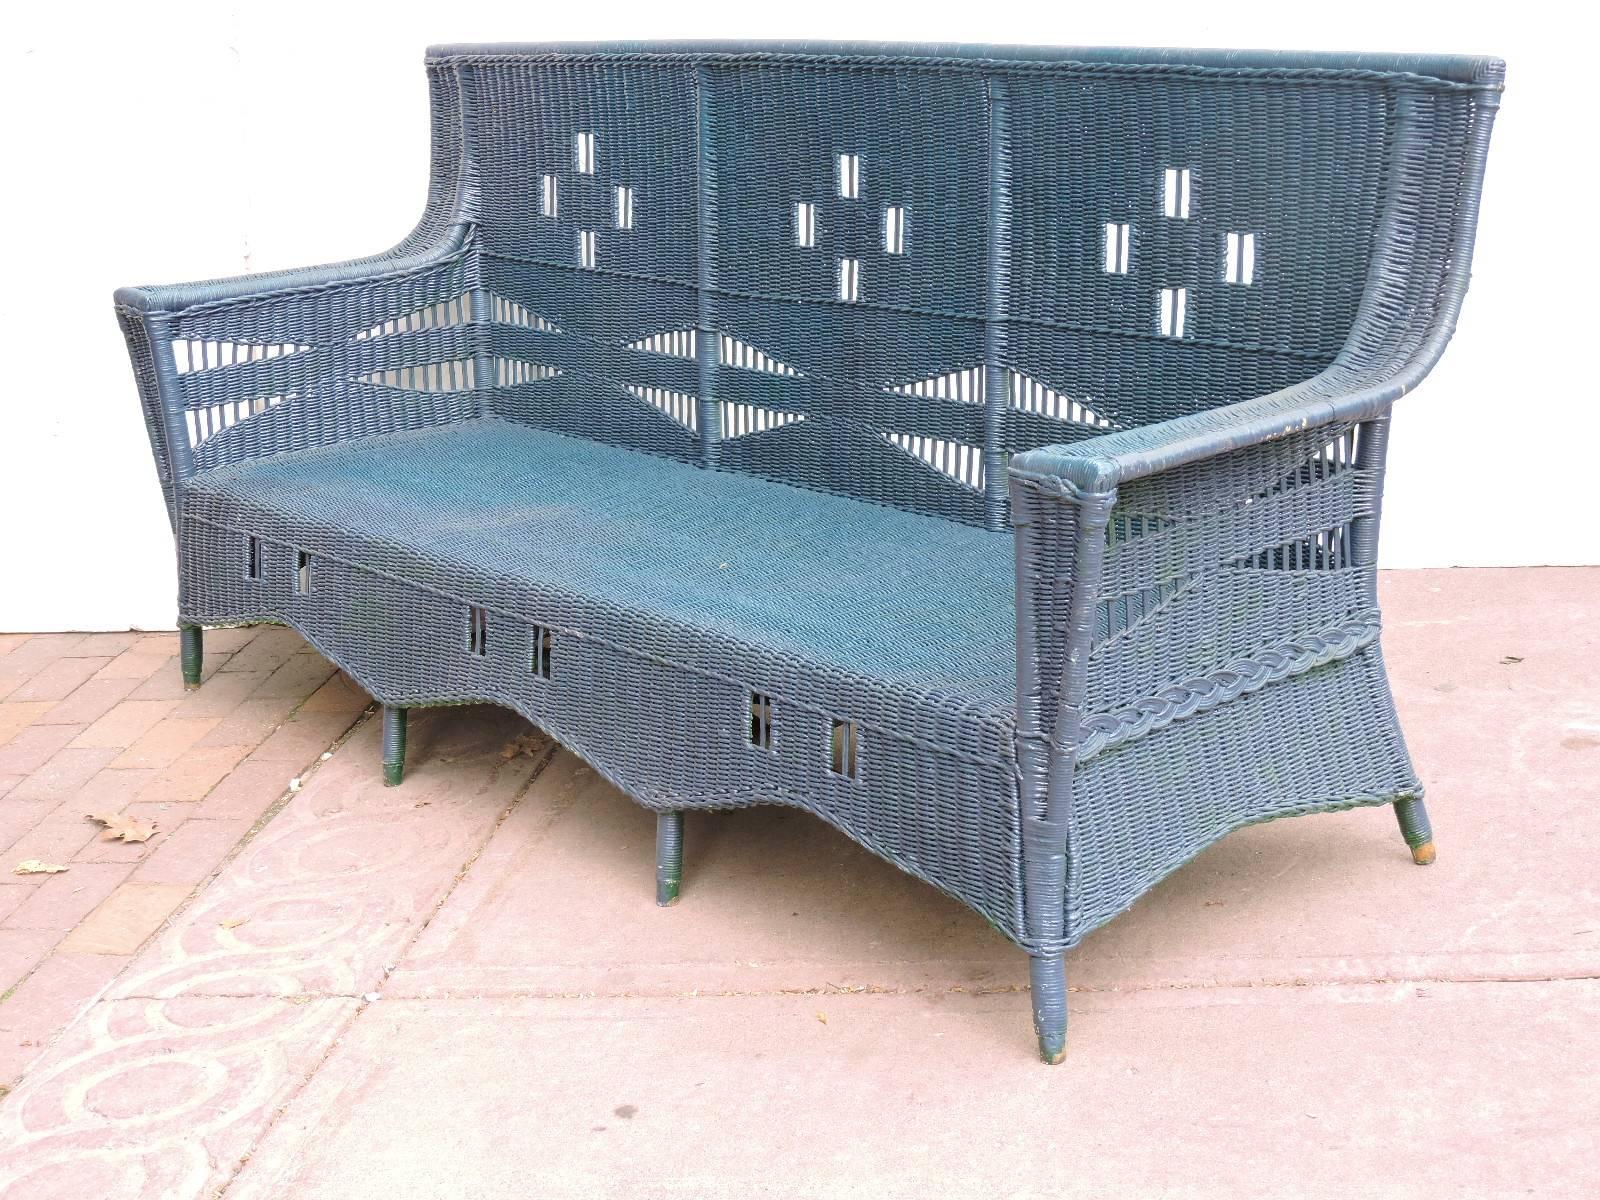 Antique high back wicker sofa in older dark teal blue painted surface with a beautifully elongated form and a repeating square cut-out design on back rest and front skirt. Very substantial, heavyweight and solid as a rock with no breaks. In the